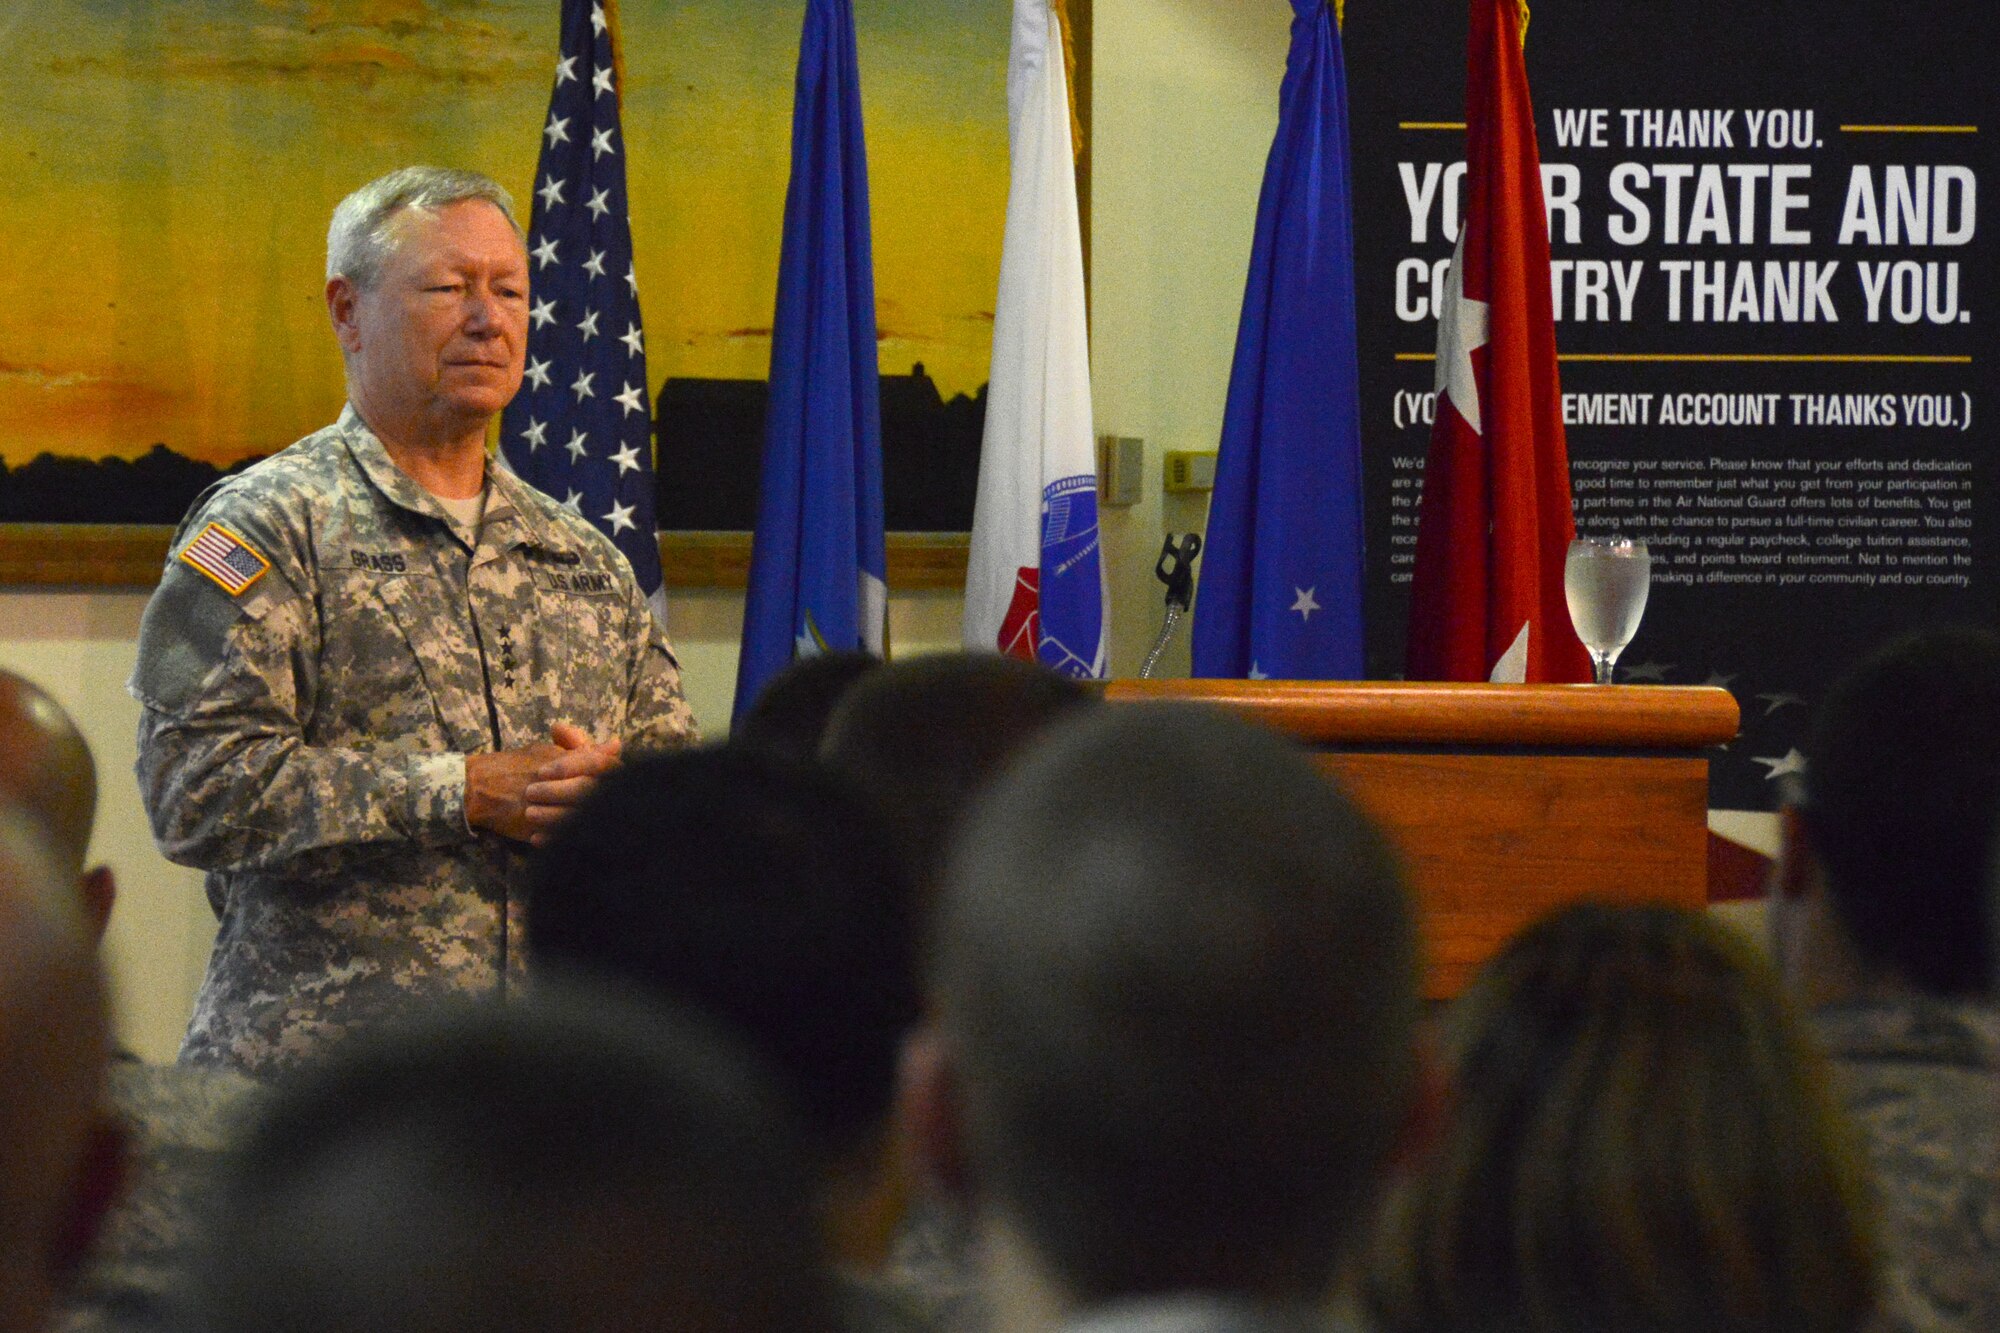 Chief of the National Guard Bureau General Frank J. Grass conducts a town hall meeting, emphasizing the importance of being in the Guard for Airmen at Bradley Air National Guard Base, East Granby, Conn, Sept. 9, 2014. This was the first time a Chief of the National Guard Bureau visited the Flying Yankees. (U.S. Air National Guard photo by Master Sgt Erin McNamara)